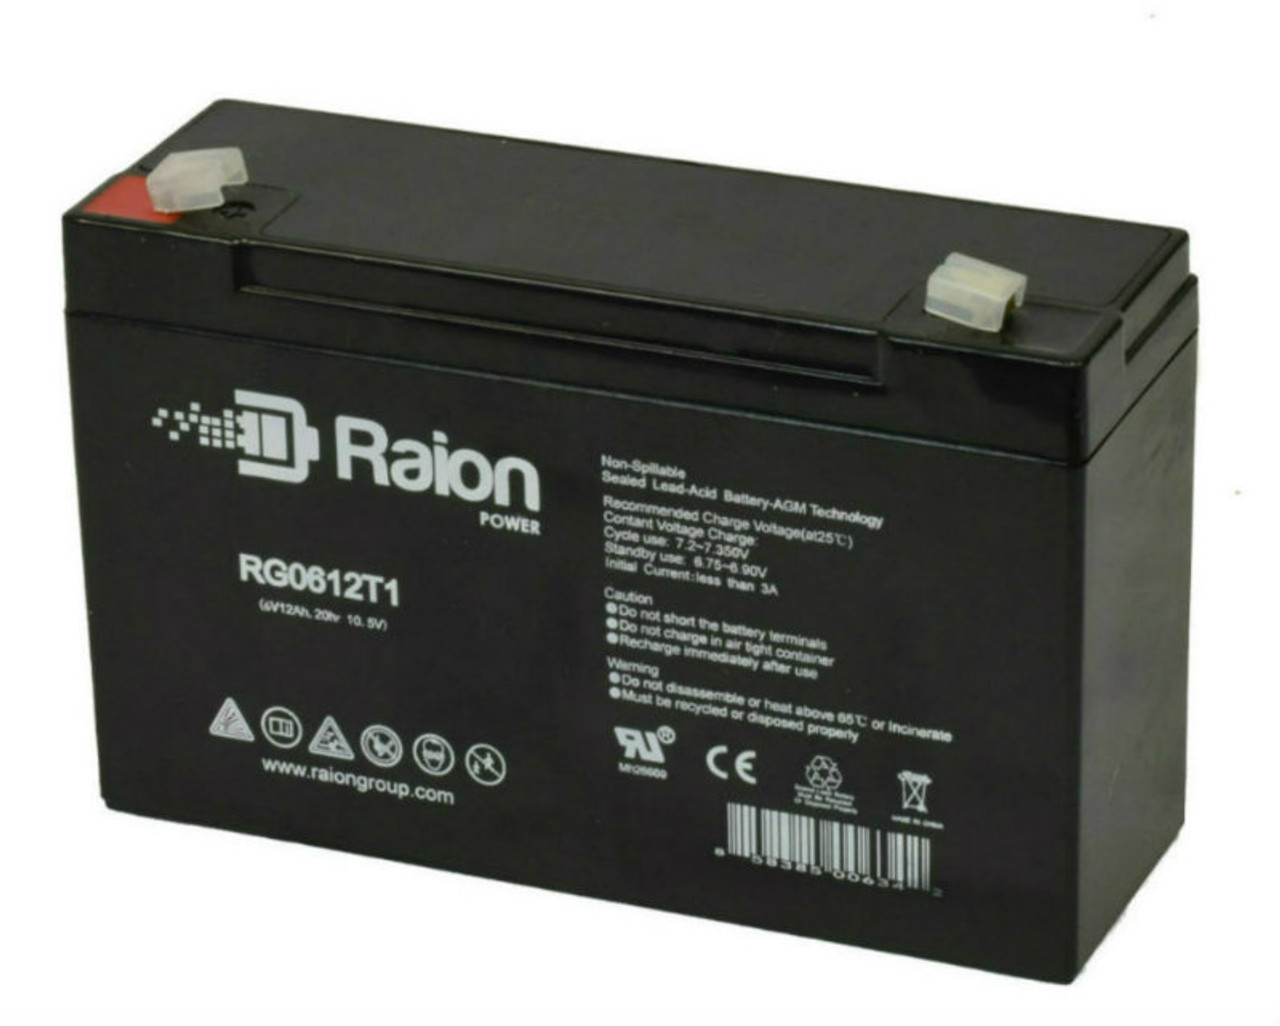 Raion Power RG06120T1 Replacement Battery for Pacetronics 2 PACER Medical Equipment